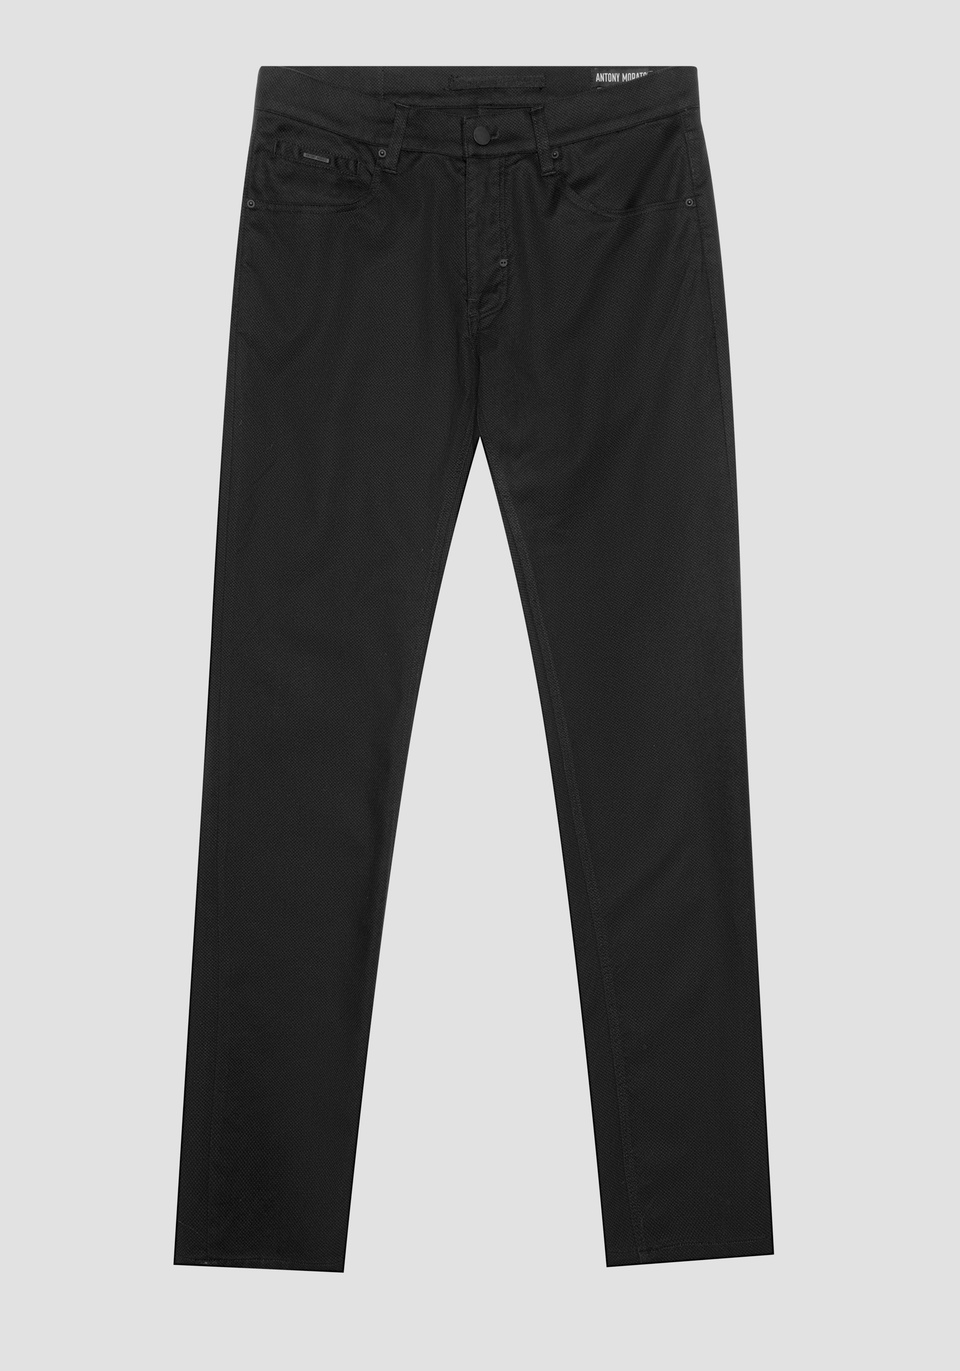 “BARRET” SKINNY-FIT TROUSERS IN STRETCH WOVEN COTTON - Antony Morato Online Shop